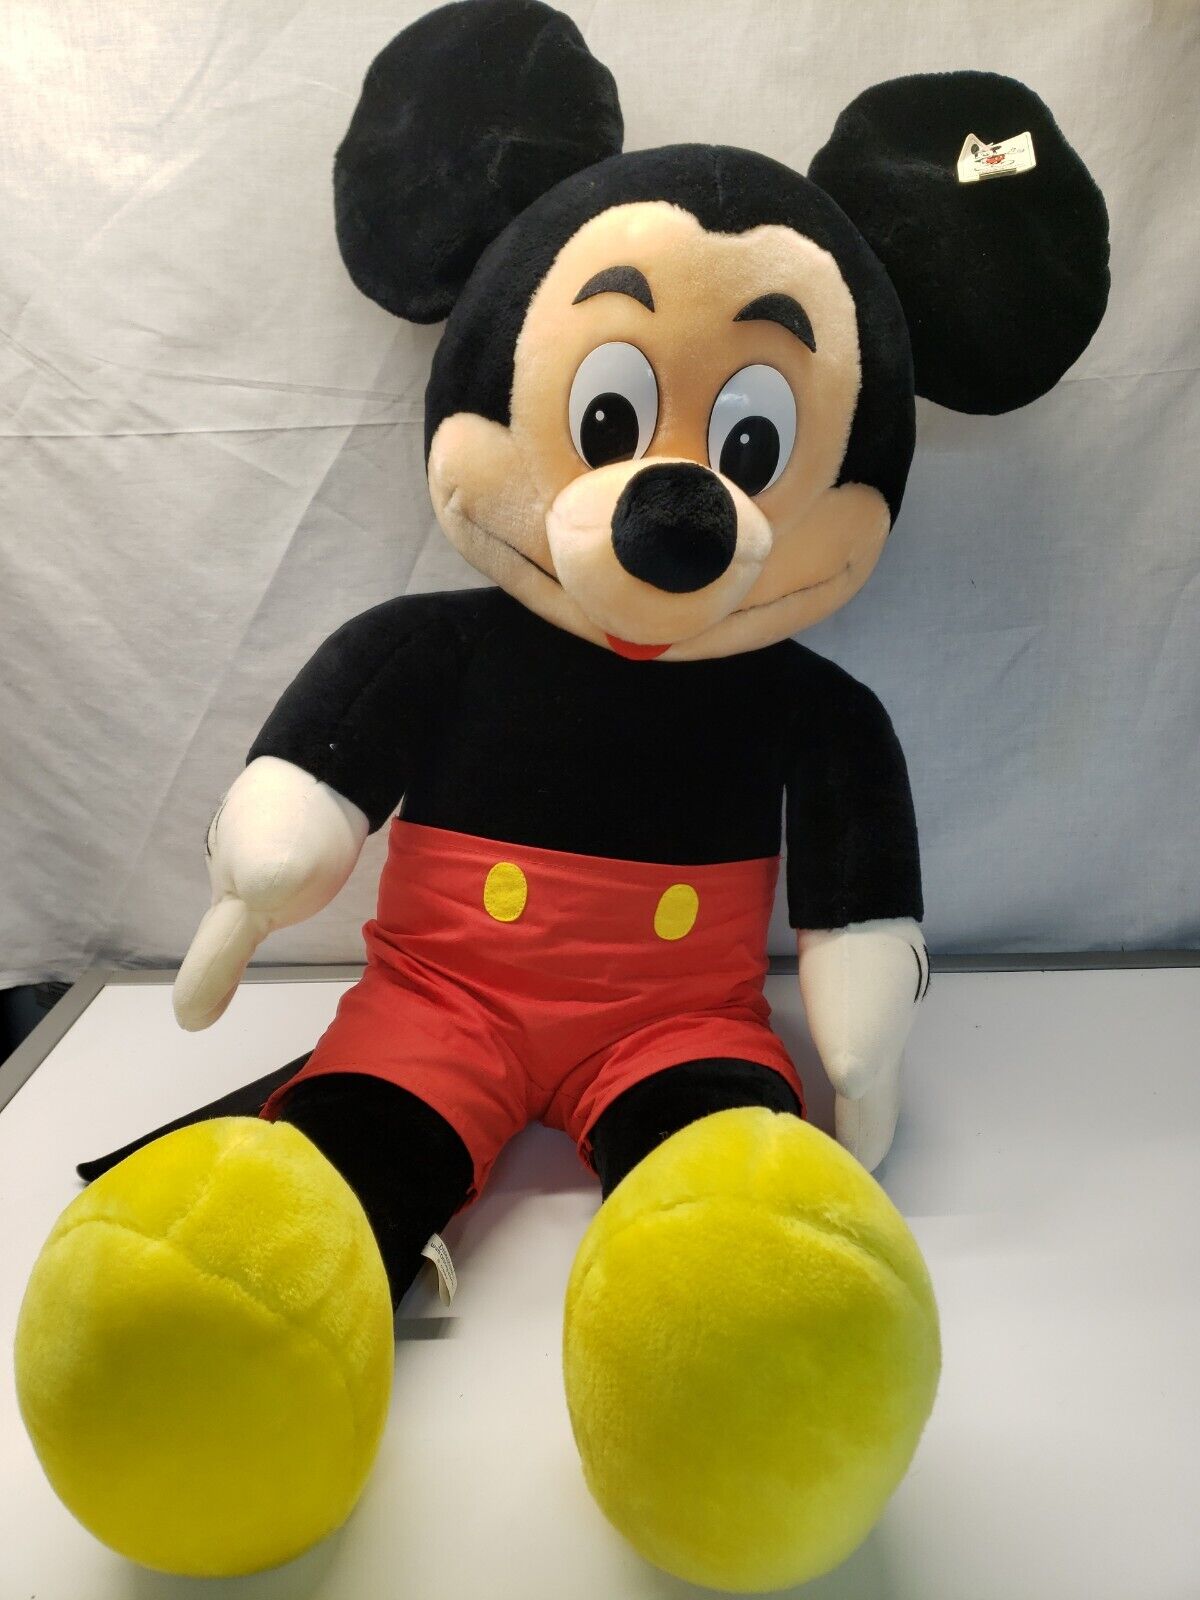 Rare Vintage 3 Foot Mickey Mouse Disneyland Plush Stuffed Toy NWT (Double TAG)